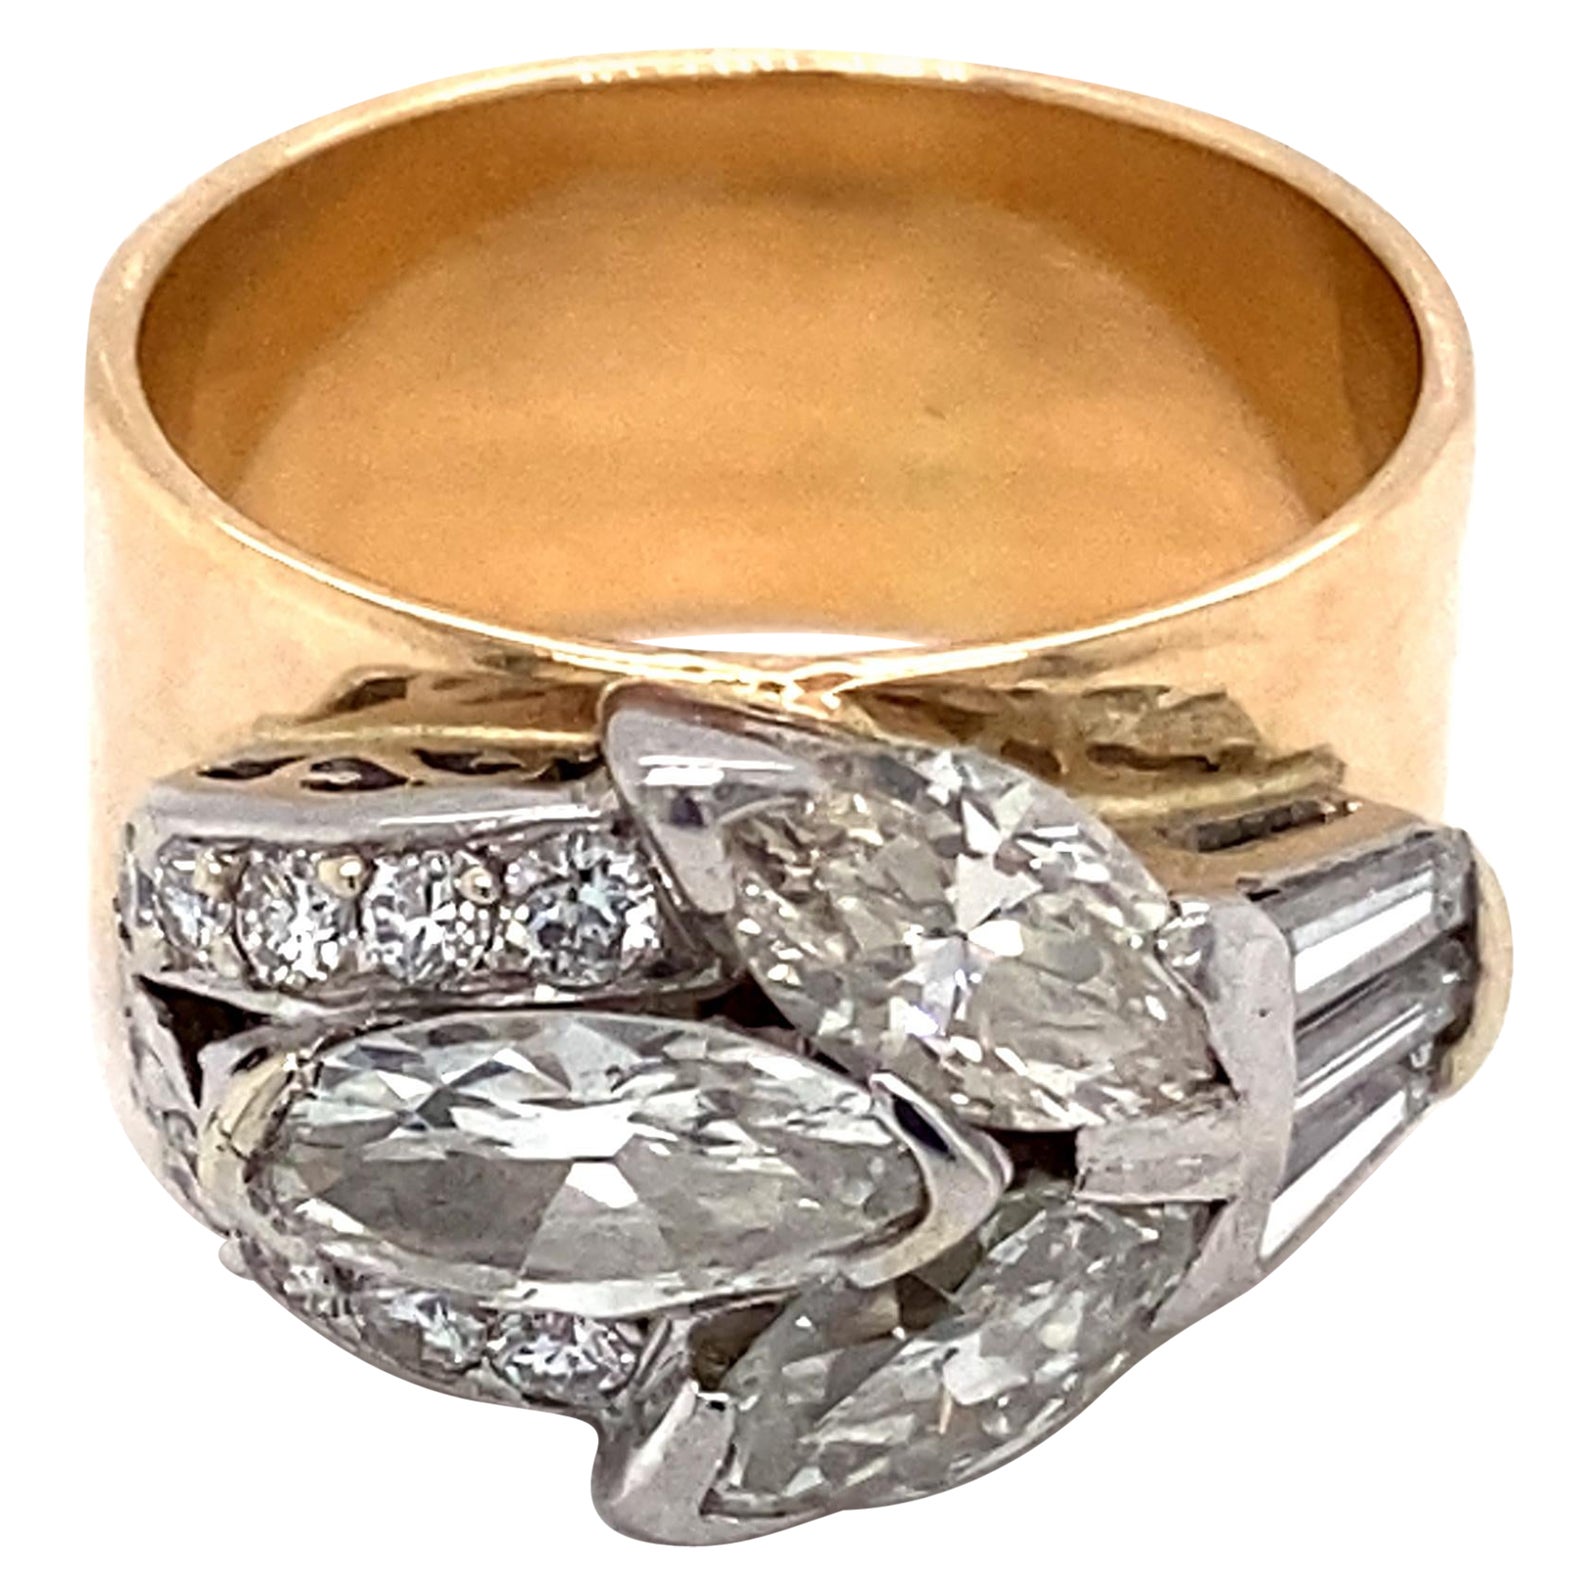 Item Details: 
Ring Size: 7.5, resizable 
Metal Type: 14 Karat Two Tone White and Yellow Gold
Weight: 12.3 grams
Finger to top of stone measures 7 millimeters


Center Diamond Details:
Cut:  Marquise
Carat: 1.91 Carats total weight
Color: